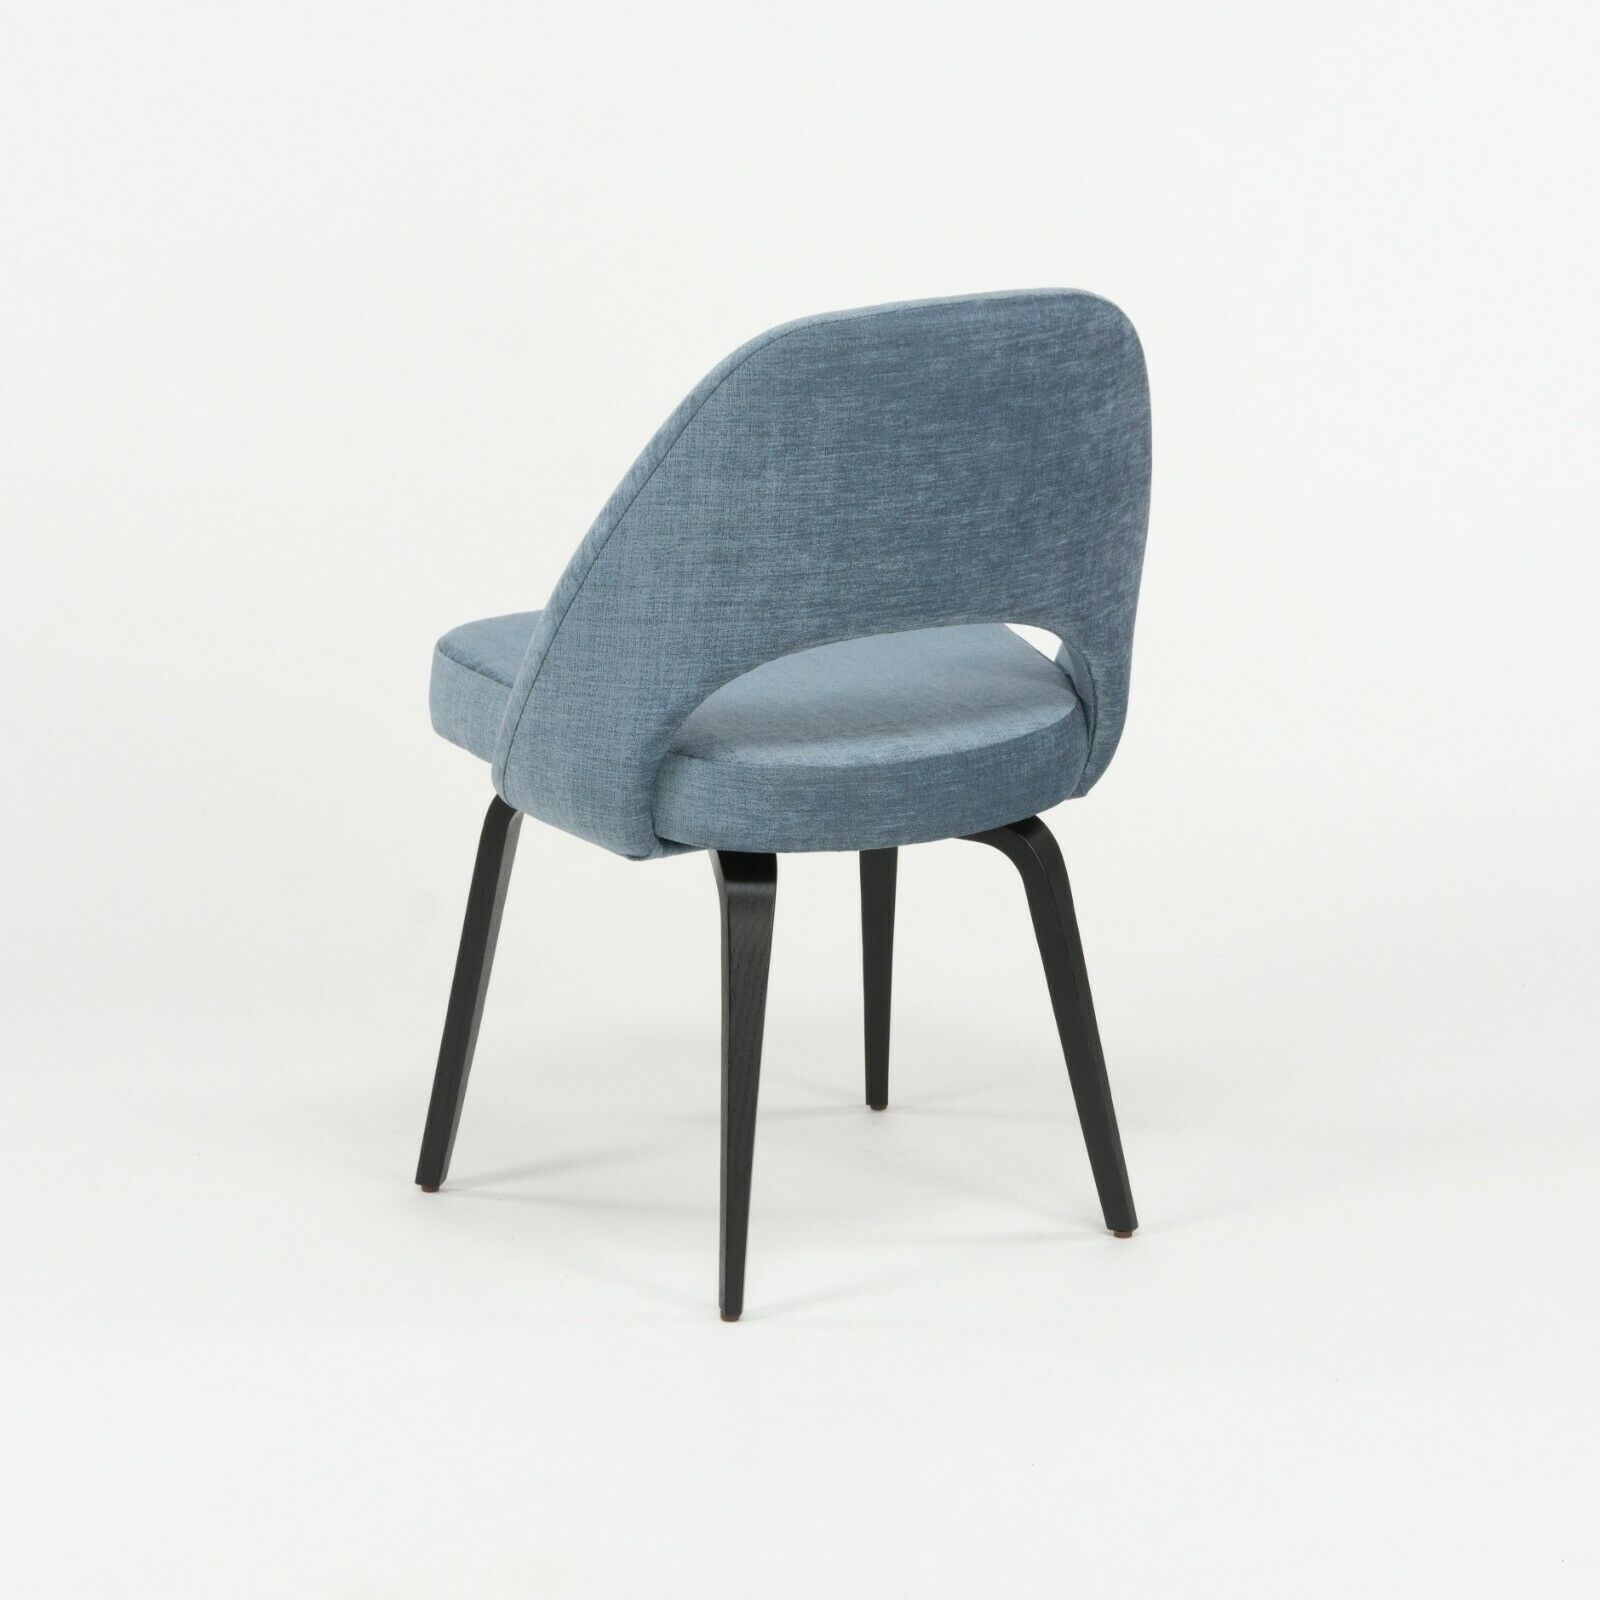 SOLD Blue Chenille 2020 Eero Saarinen Knoll Executive Side Chair with Wood Legs 2x Available